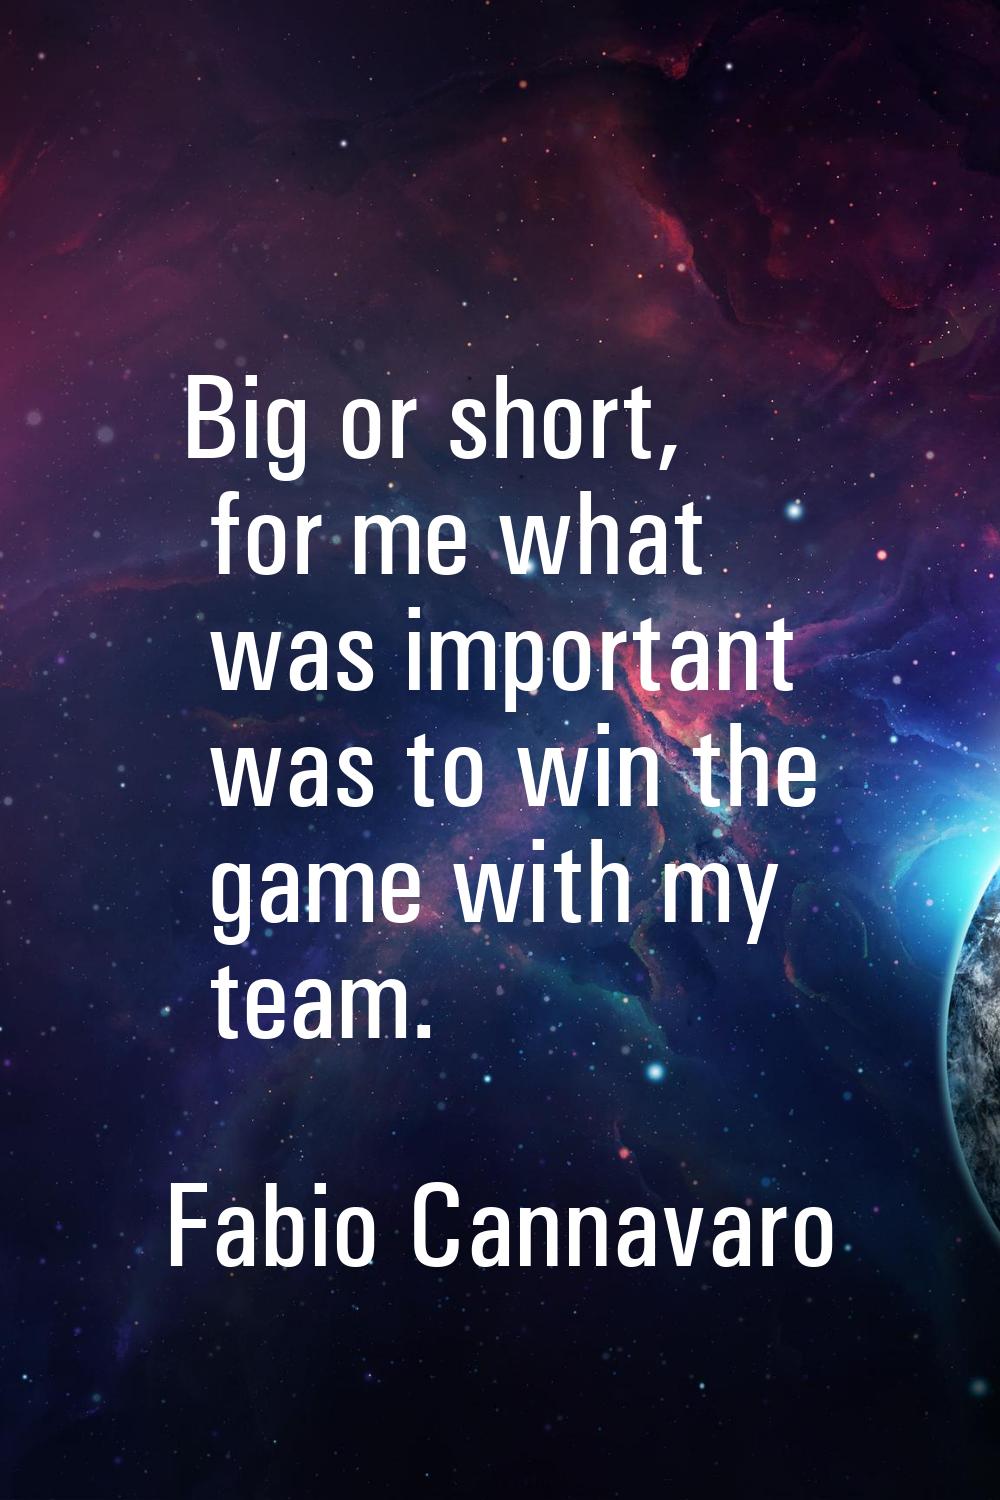 Big or short, for me what was important was to win the game with my team.